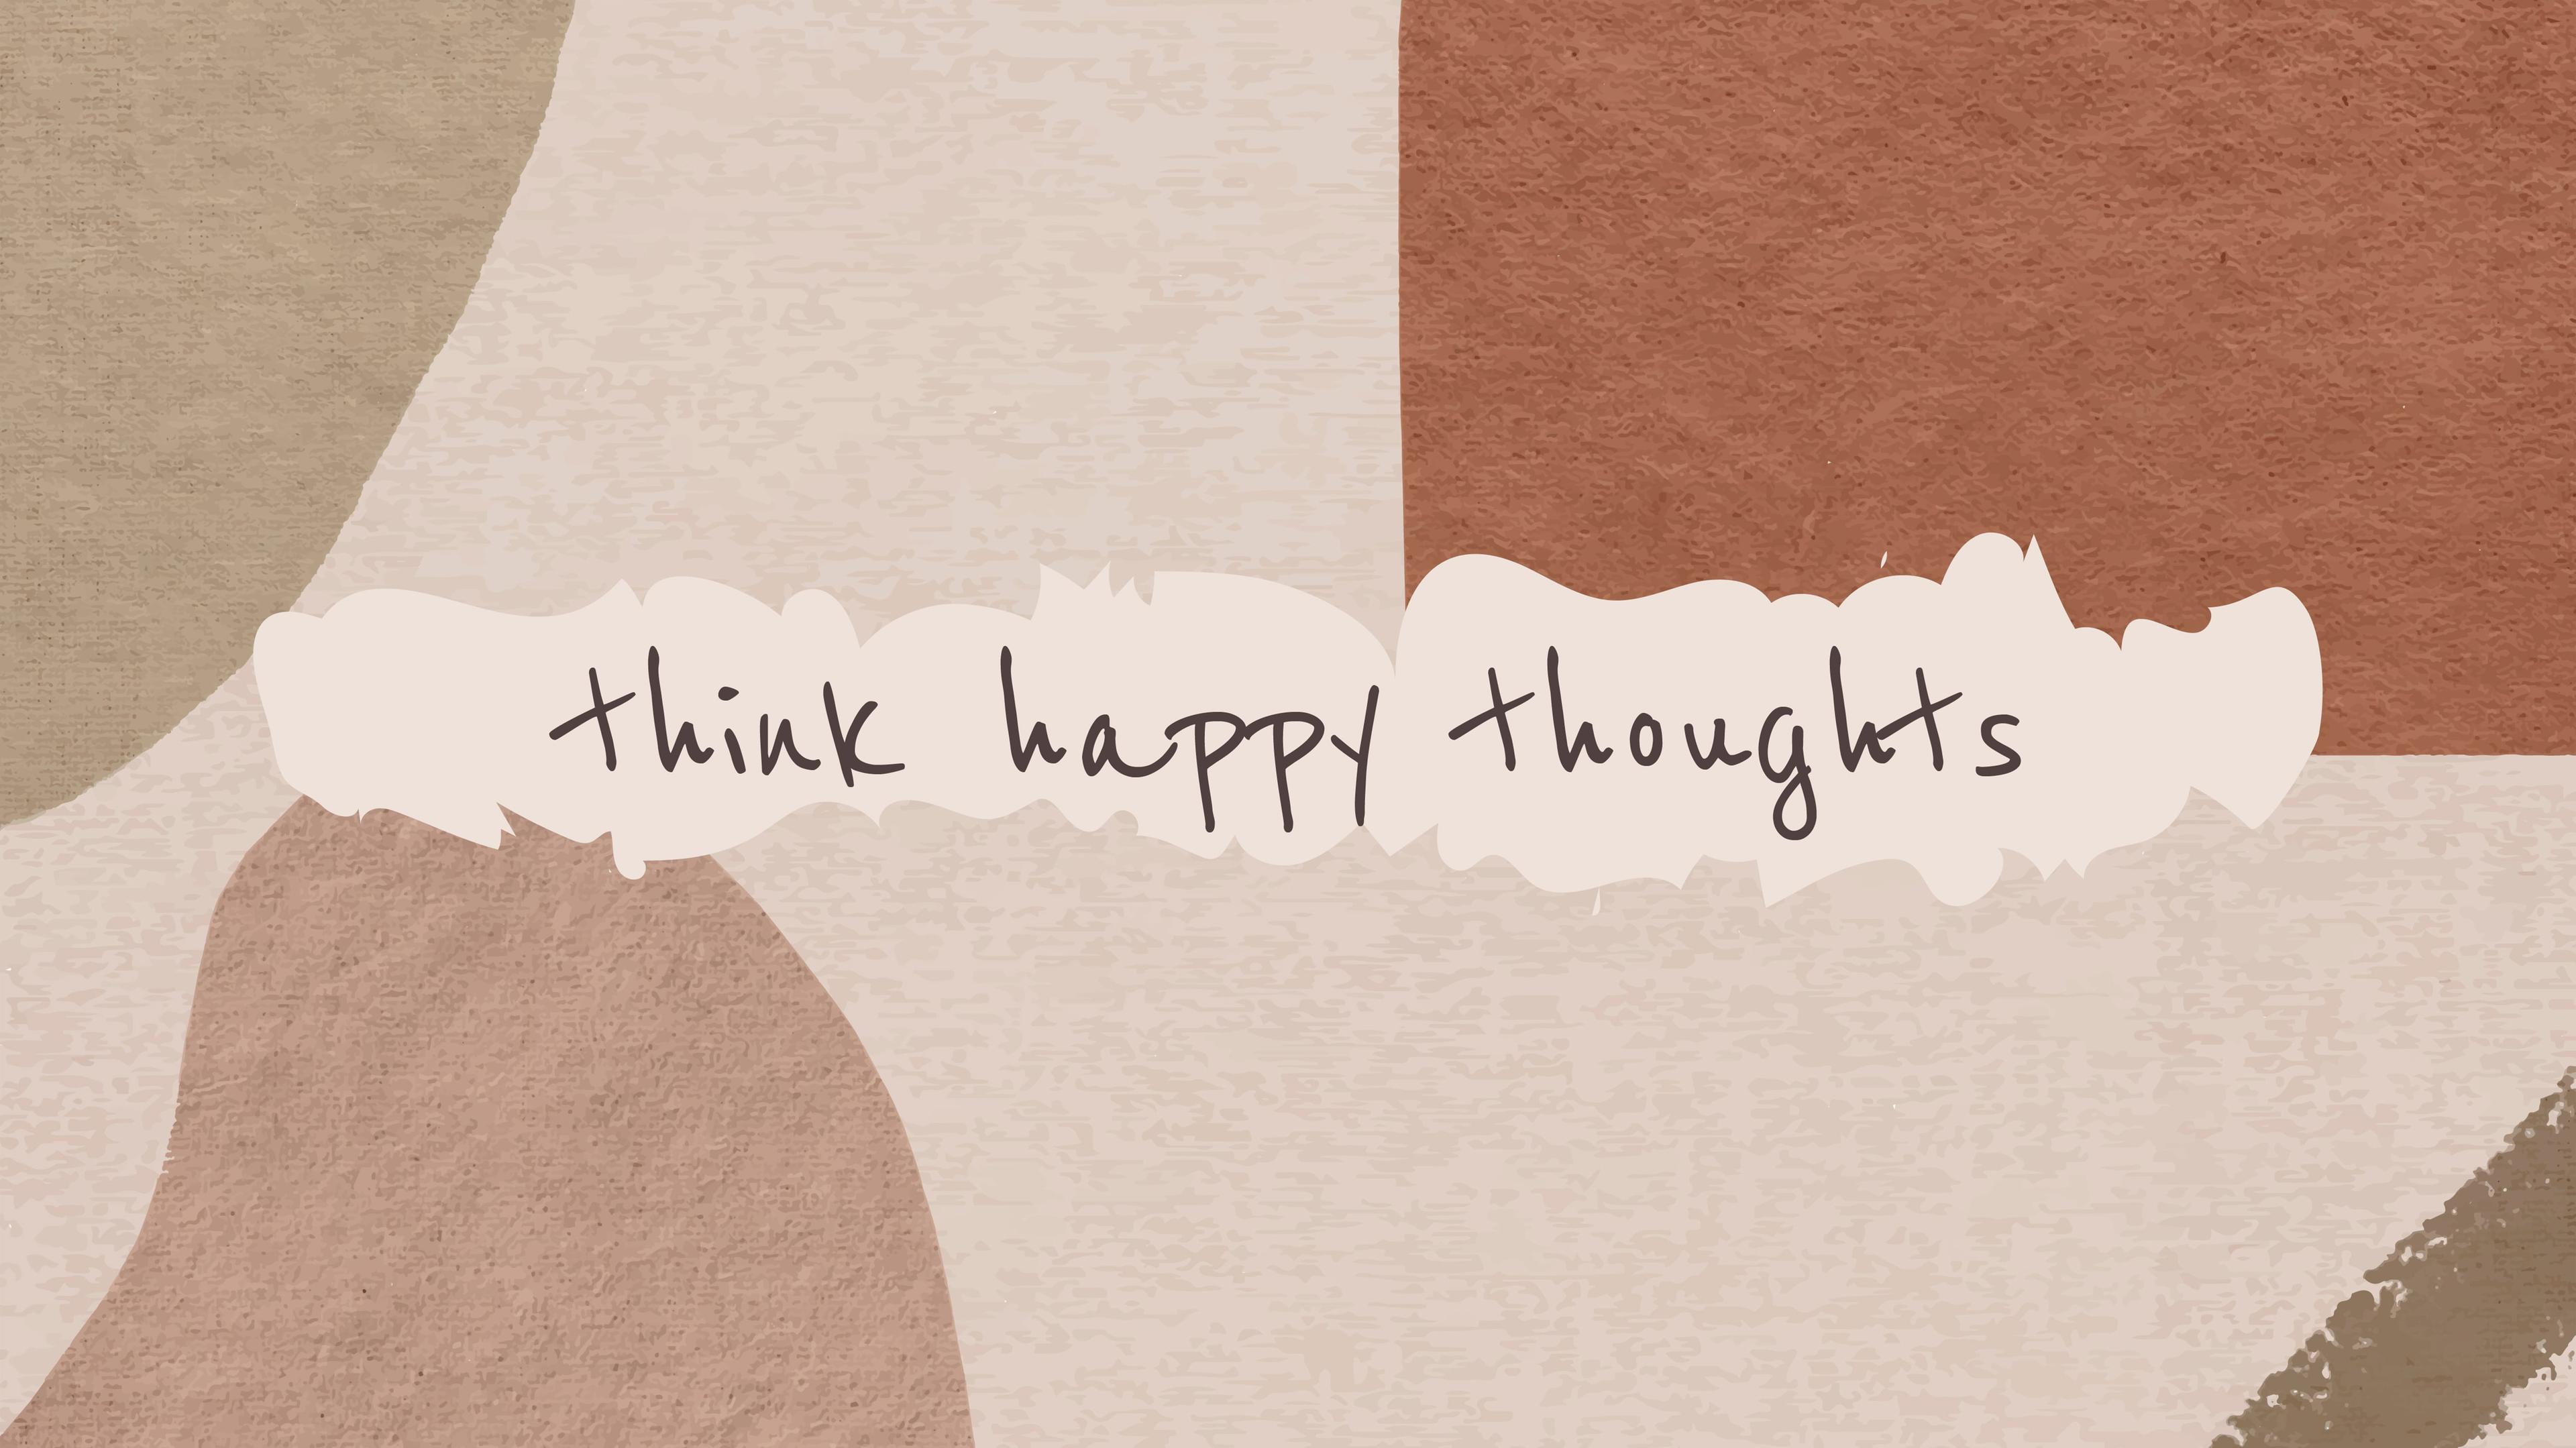 "think happy thoughts" written on a peach and brown color motivational wallpaper